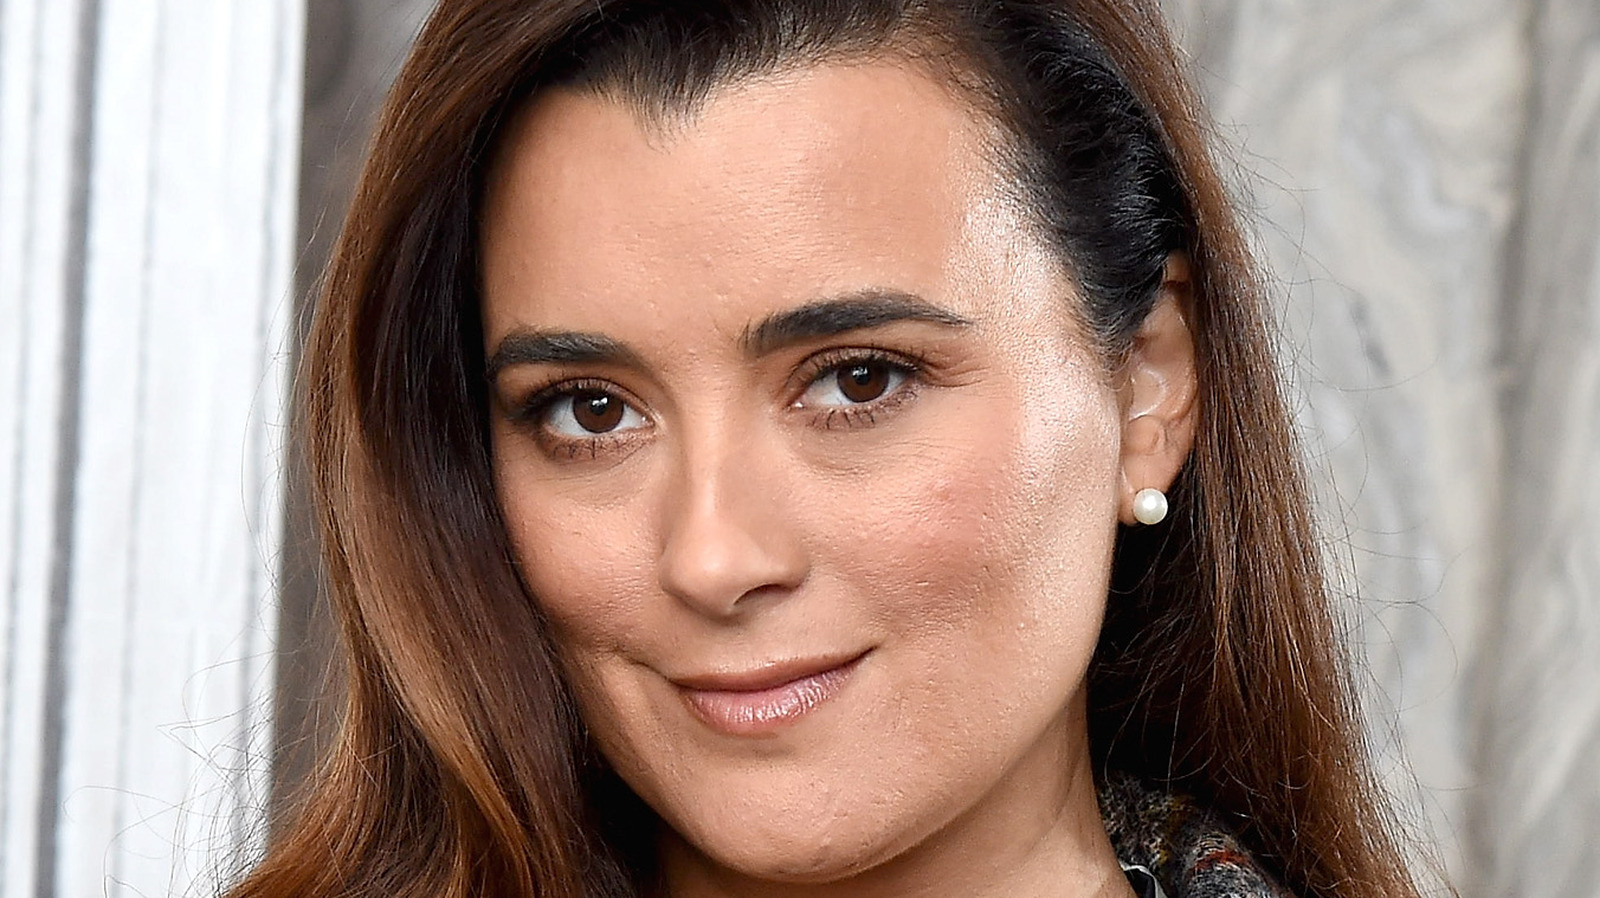 Cote De Pablo Had To Face This Major Fear To Star In NCIS.